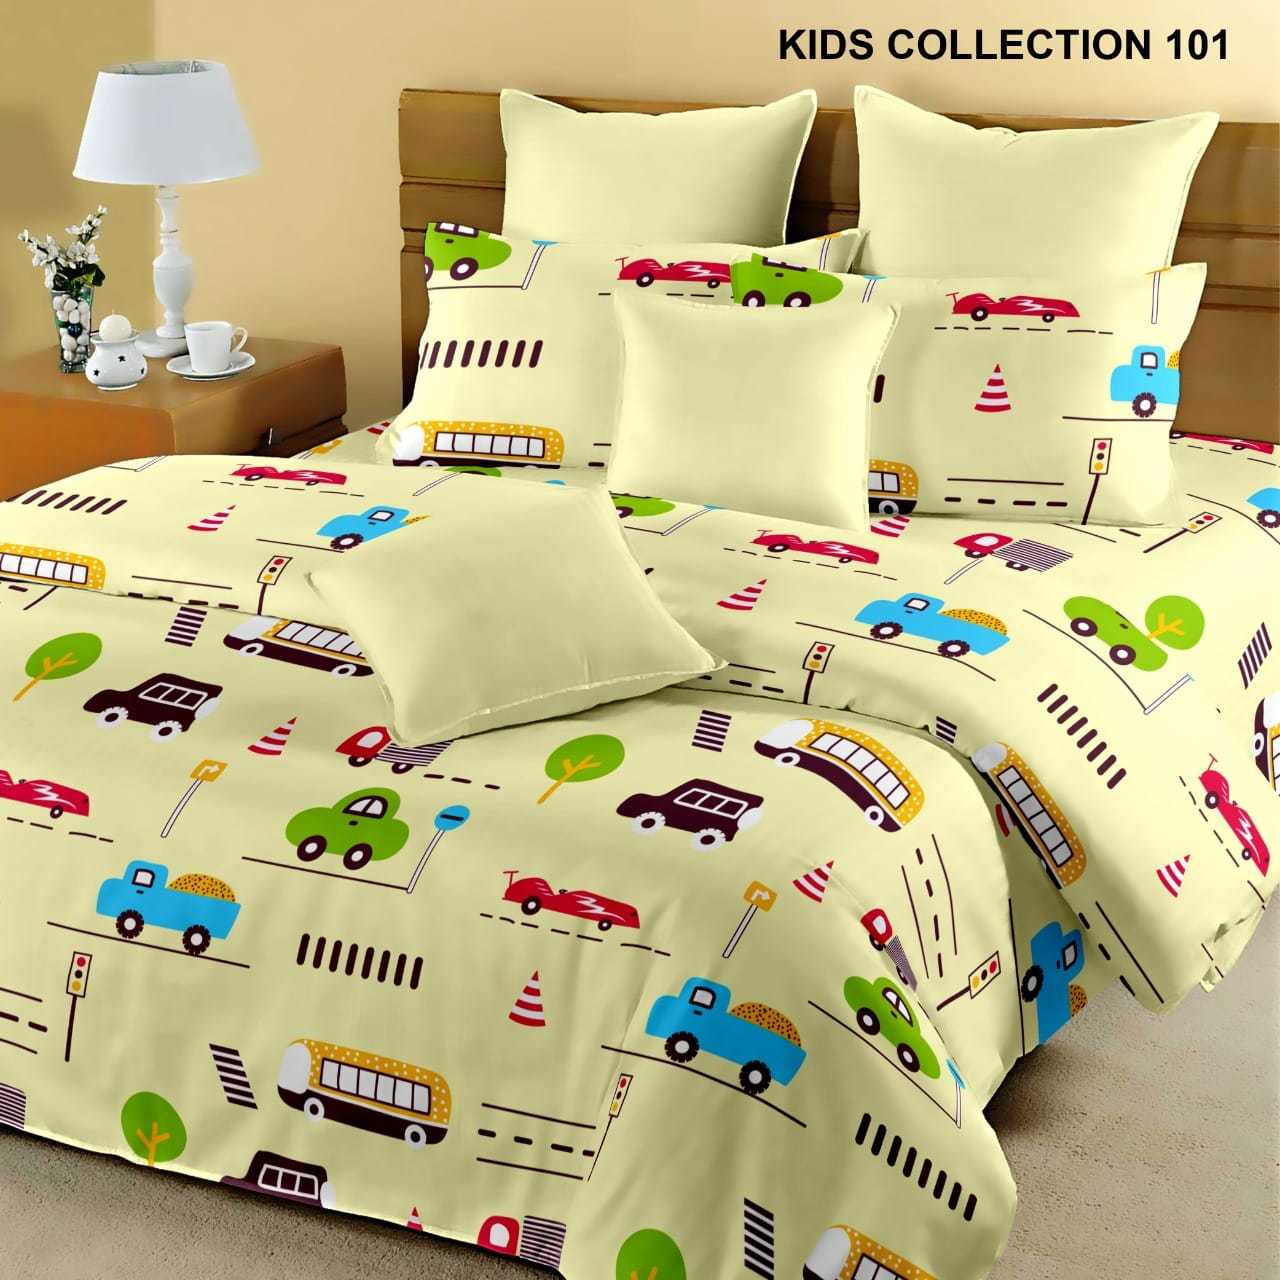 COTTON BED SHEETS/CARTOON COTTON BEDSHEETS